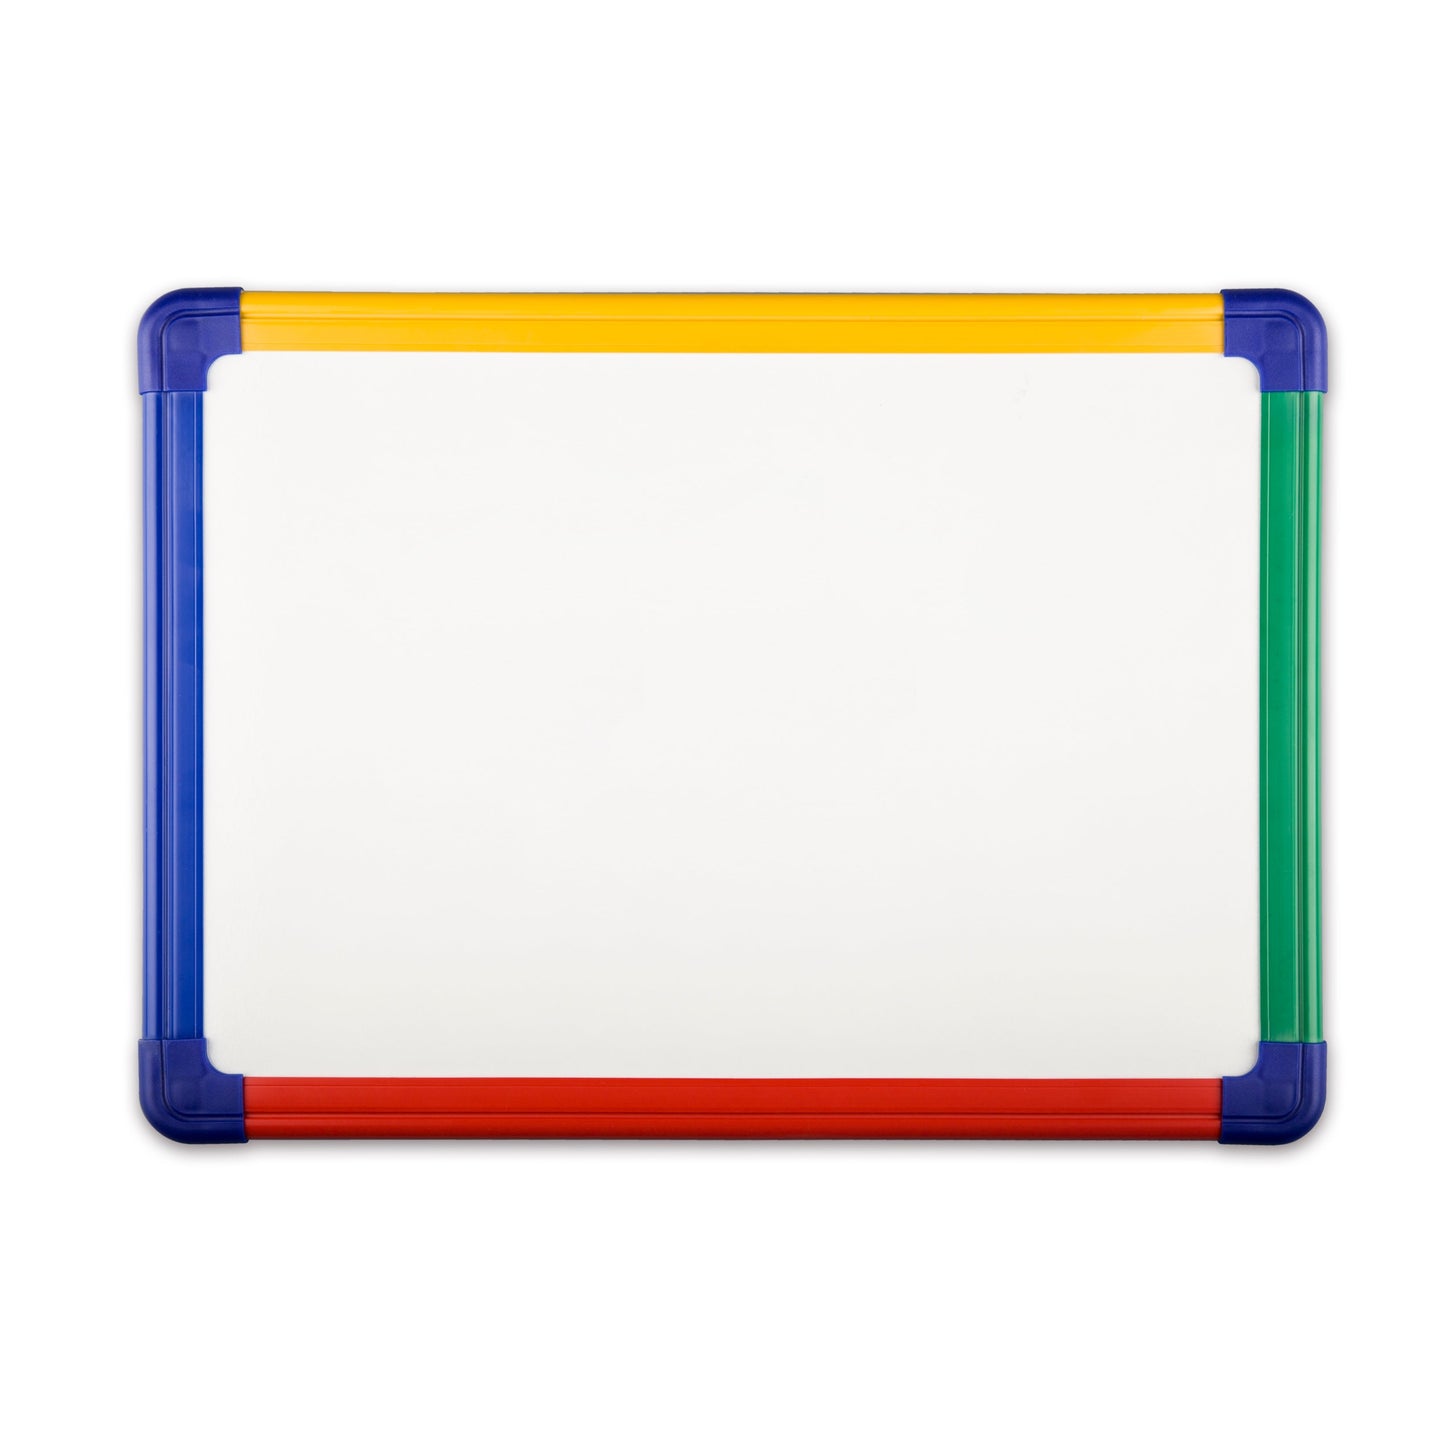 Color Frame Magnetic Dry Erase Board A4 White board Rainbow Frame Lap Board For School Classroom Teaching - Premium dry erase lapboard from Madic Whiteboard - Madic Whiteboard